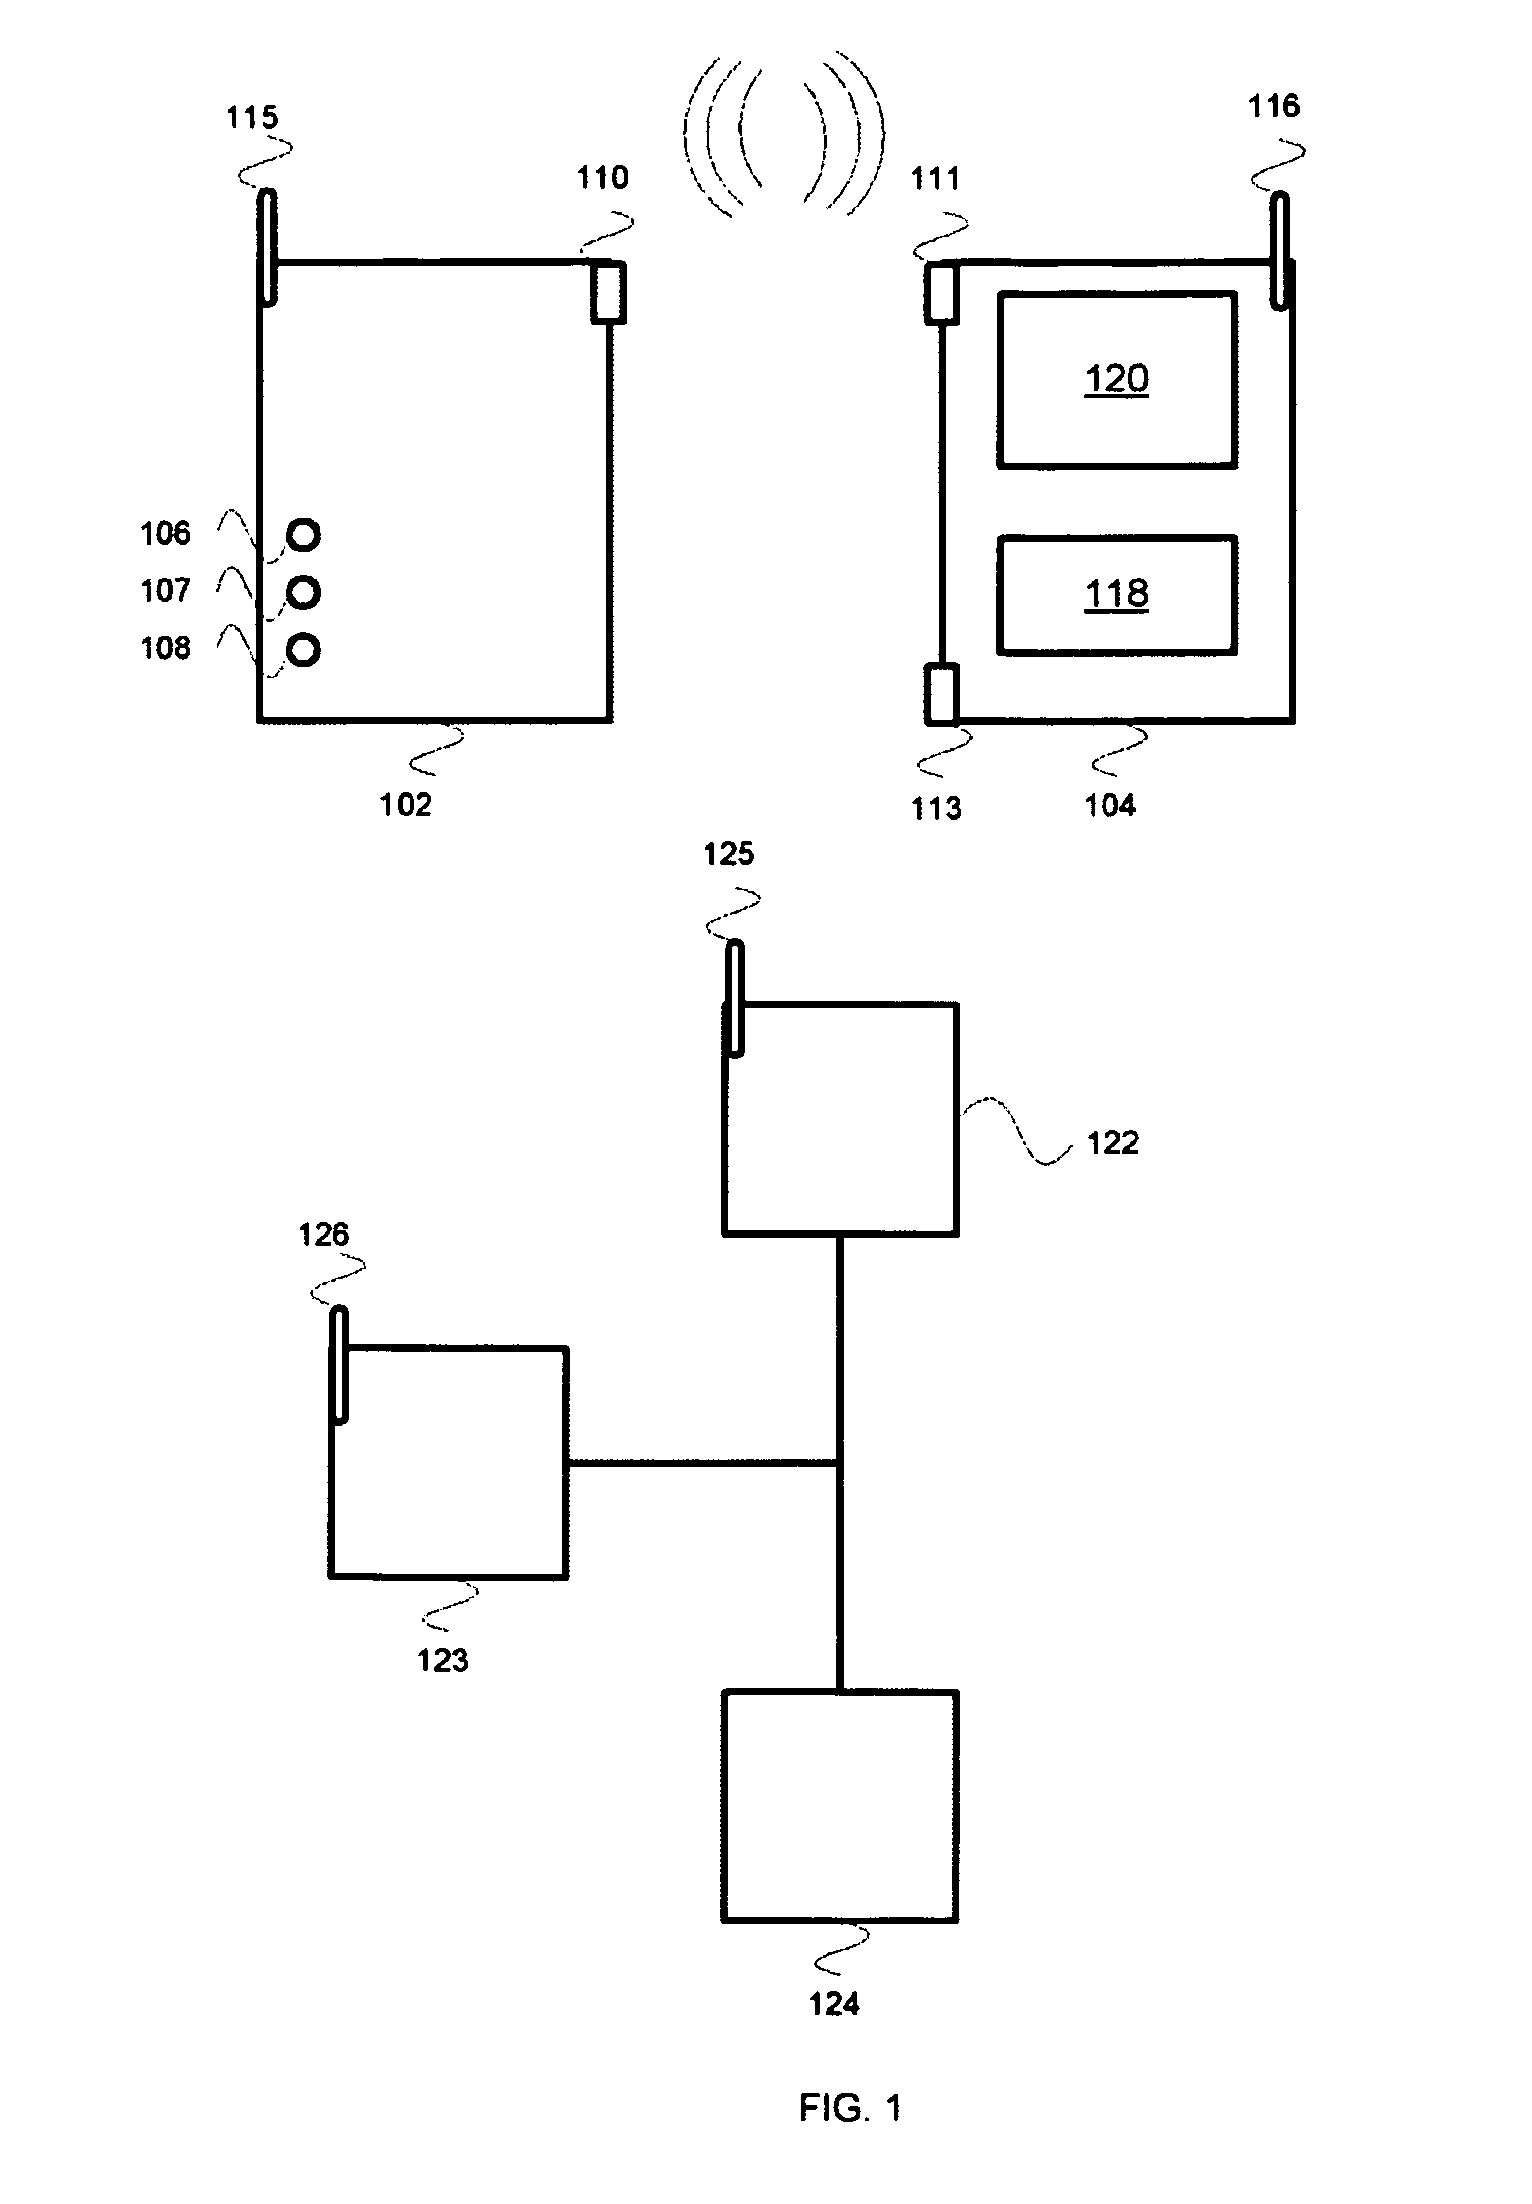 Device pairing via device to device contact